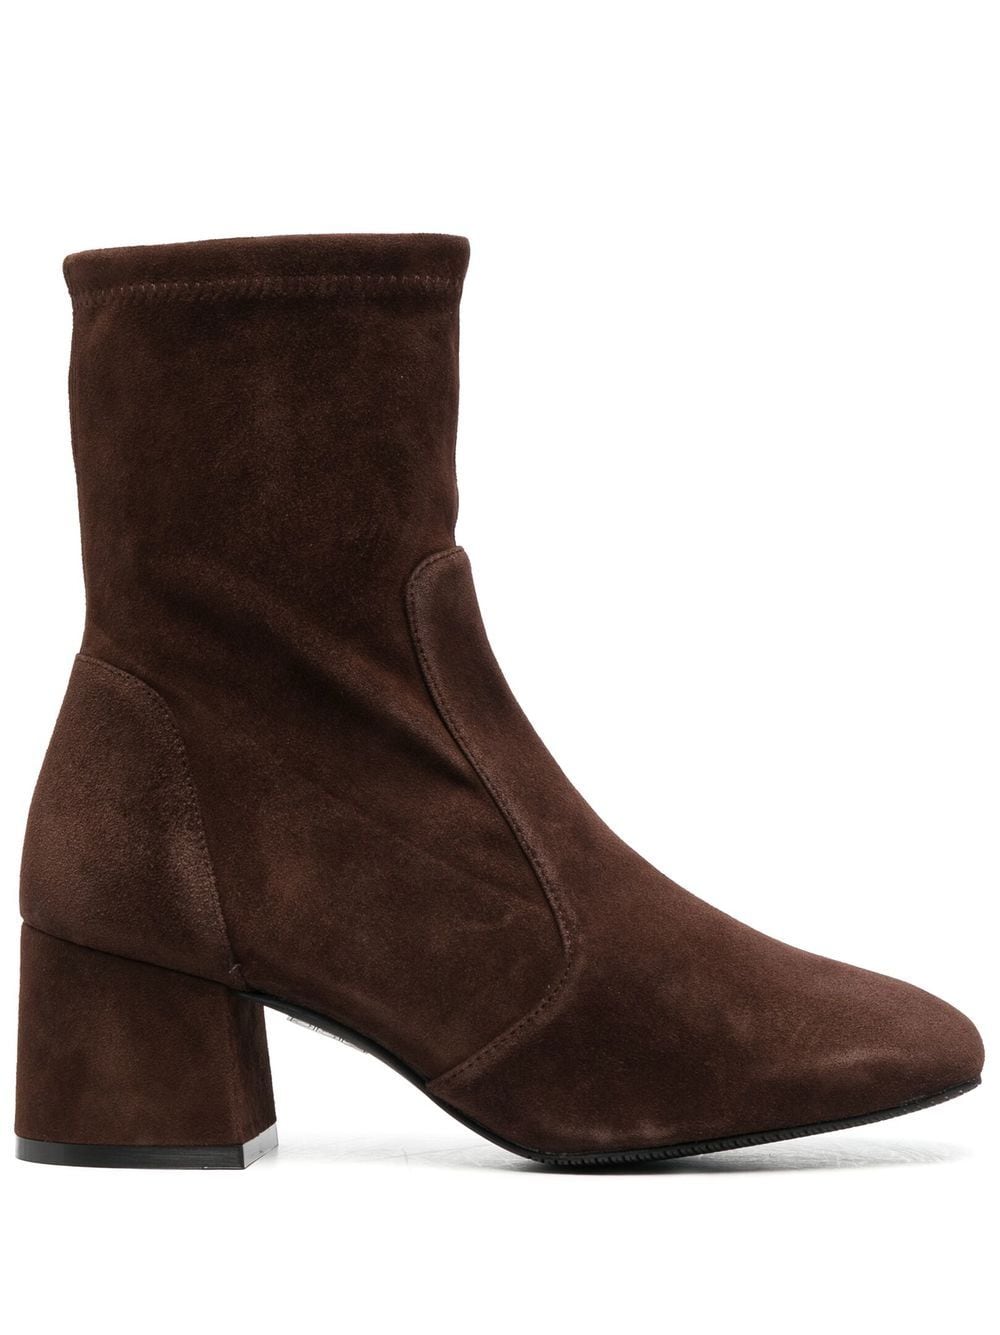 Image 1 of Stuart Weitzman suede 60mm ankle boots